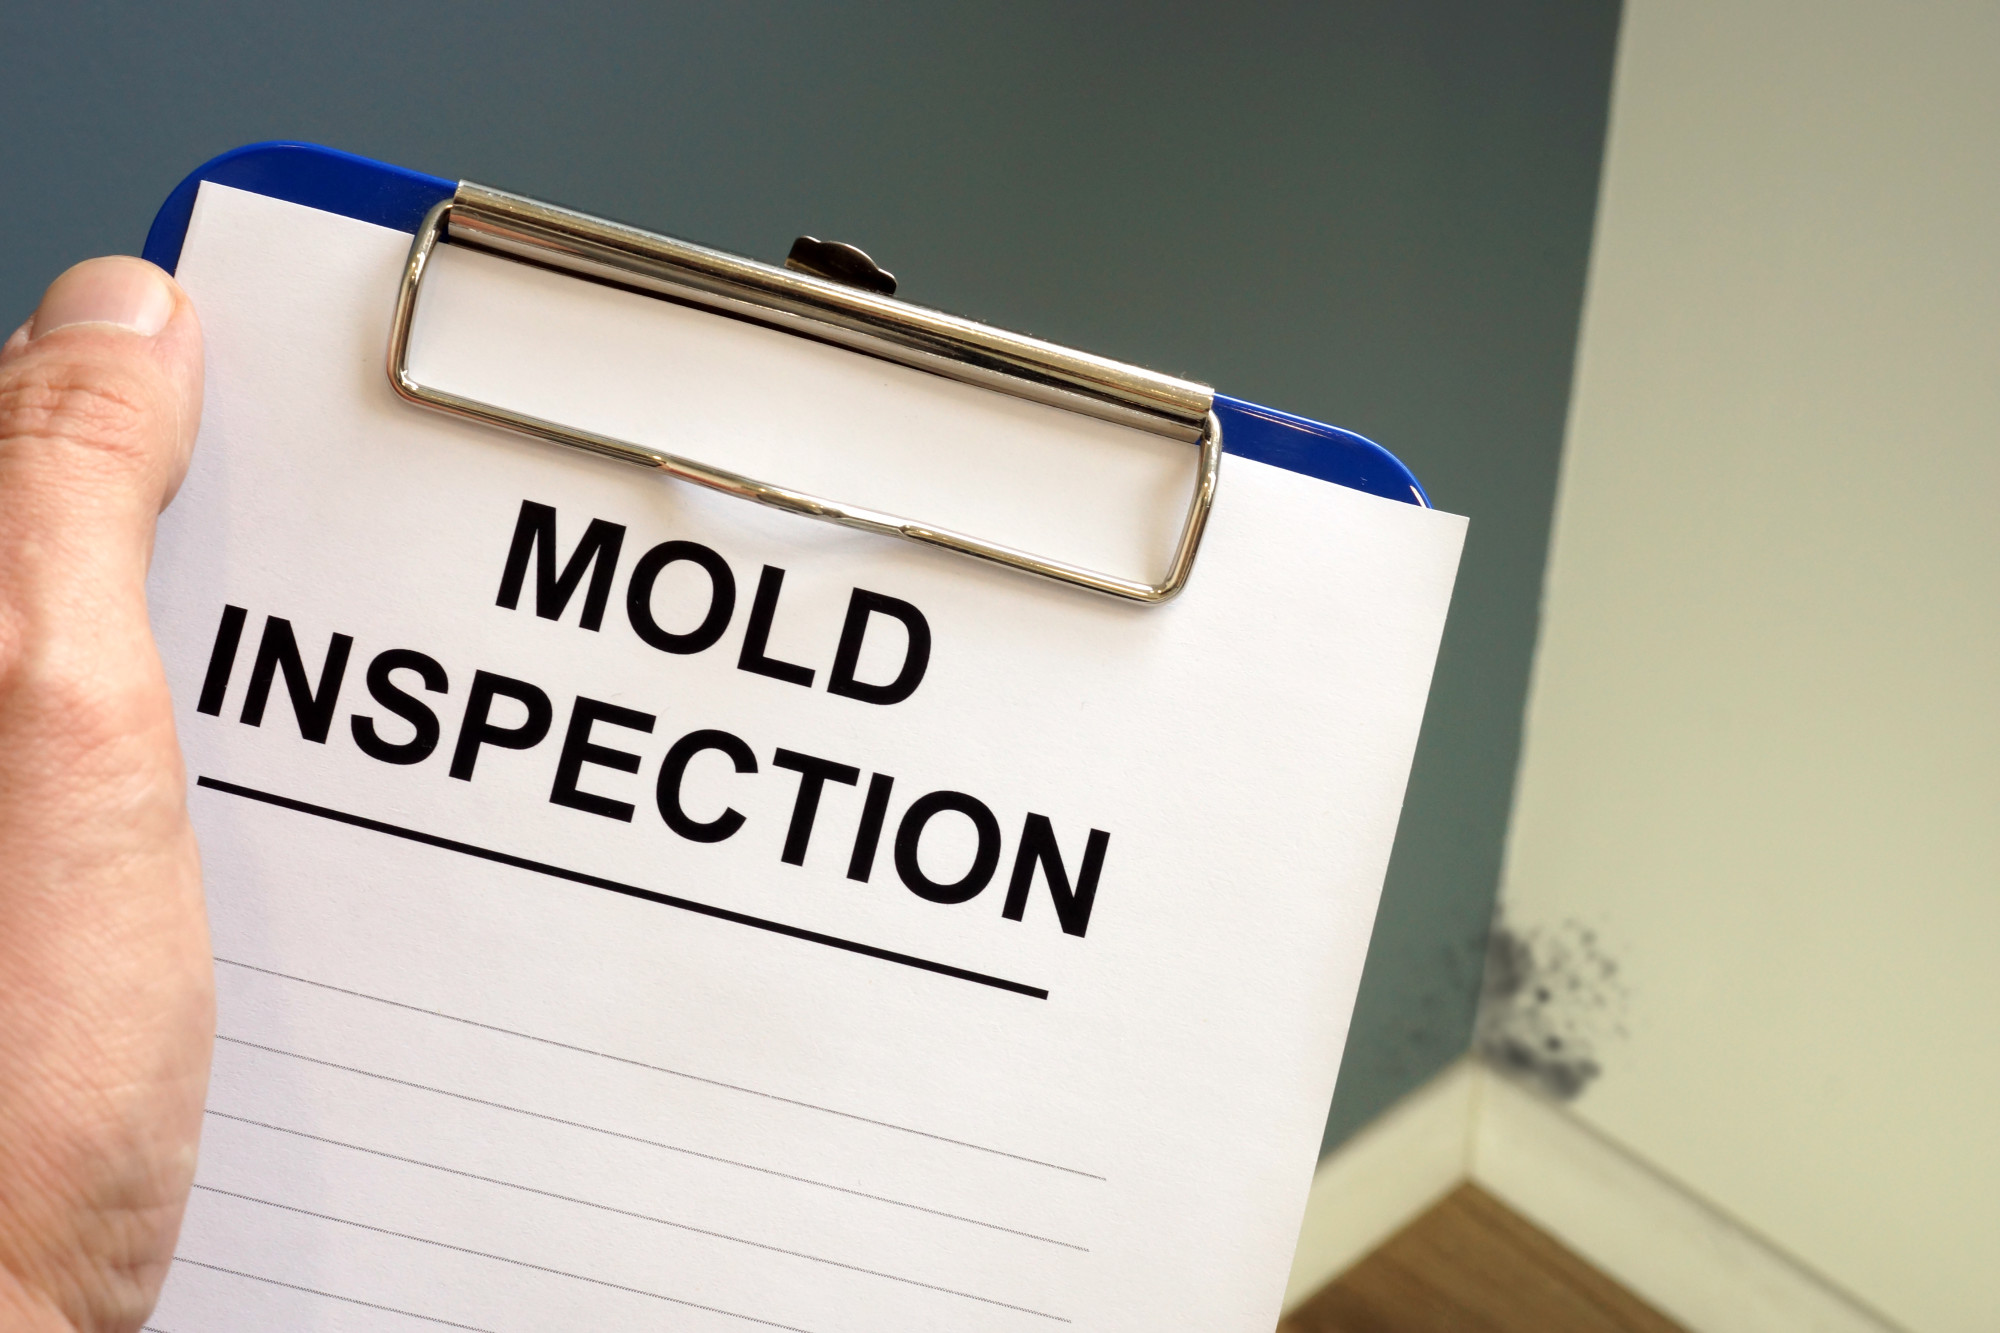 What Are the Benefits of Mold Inspections?